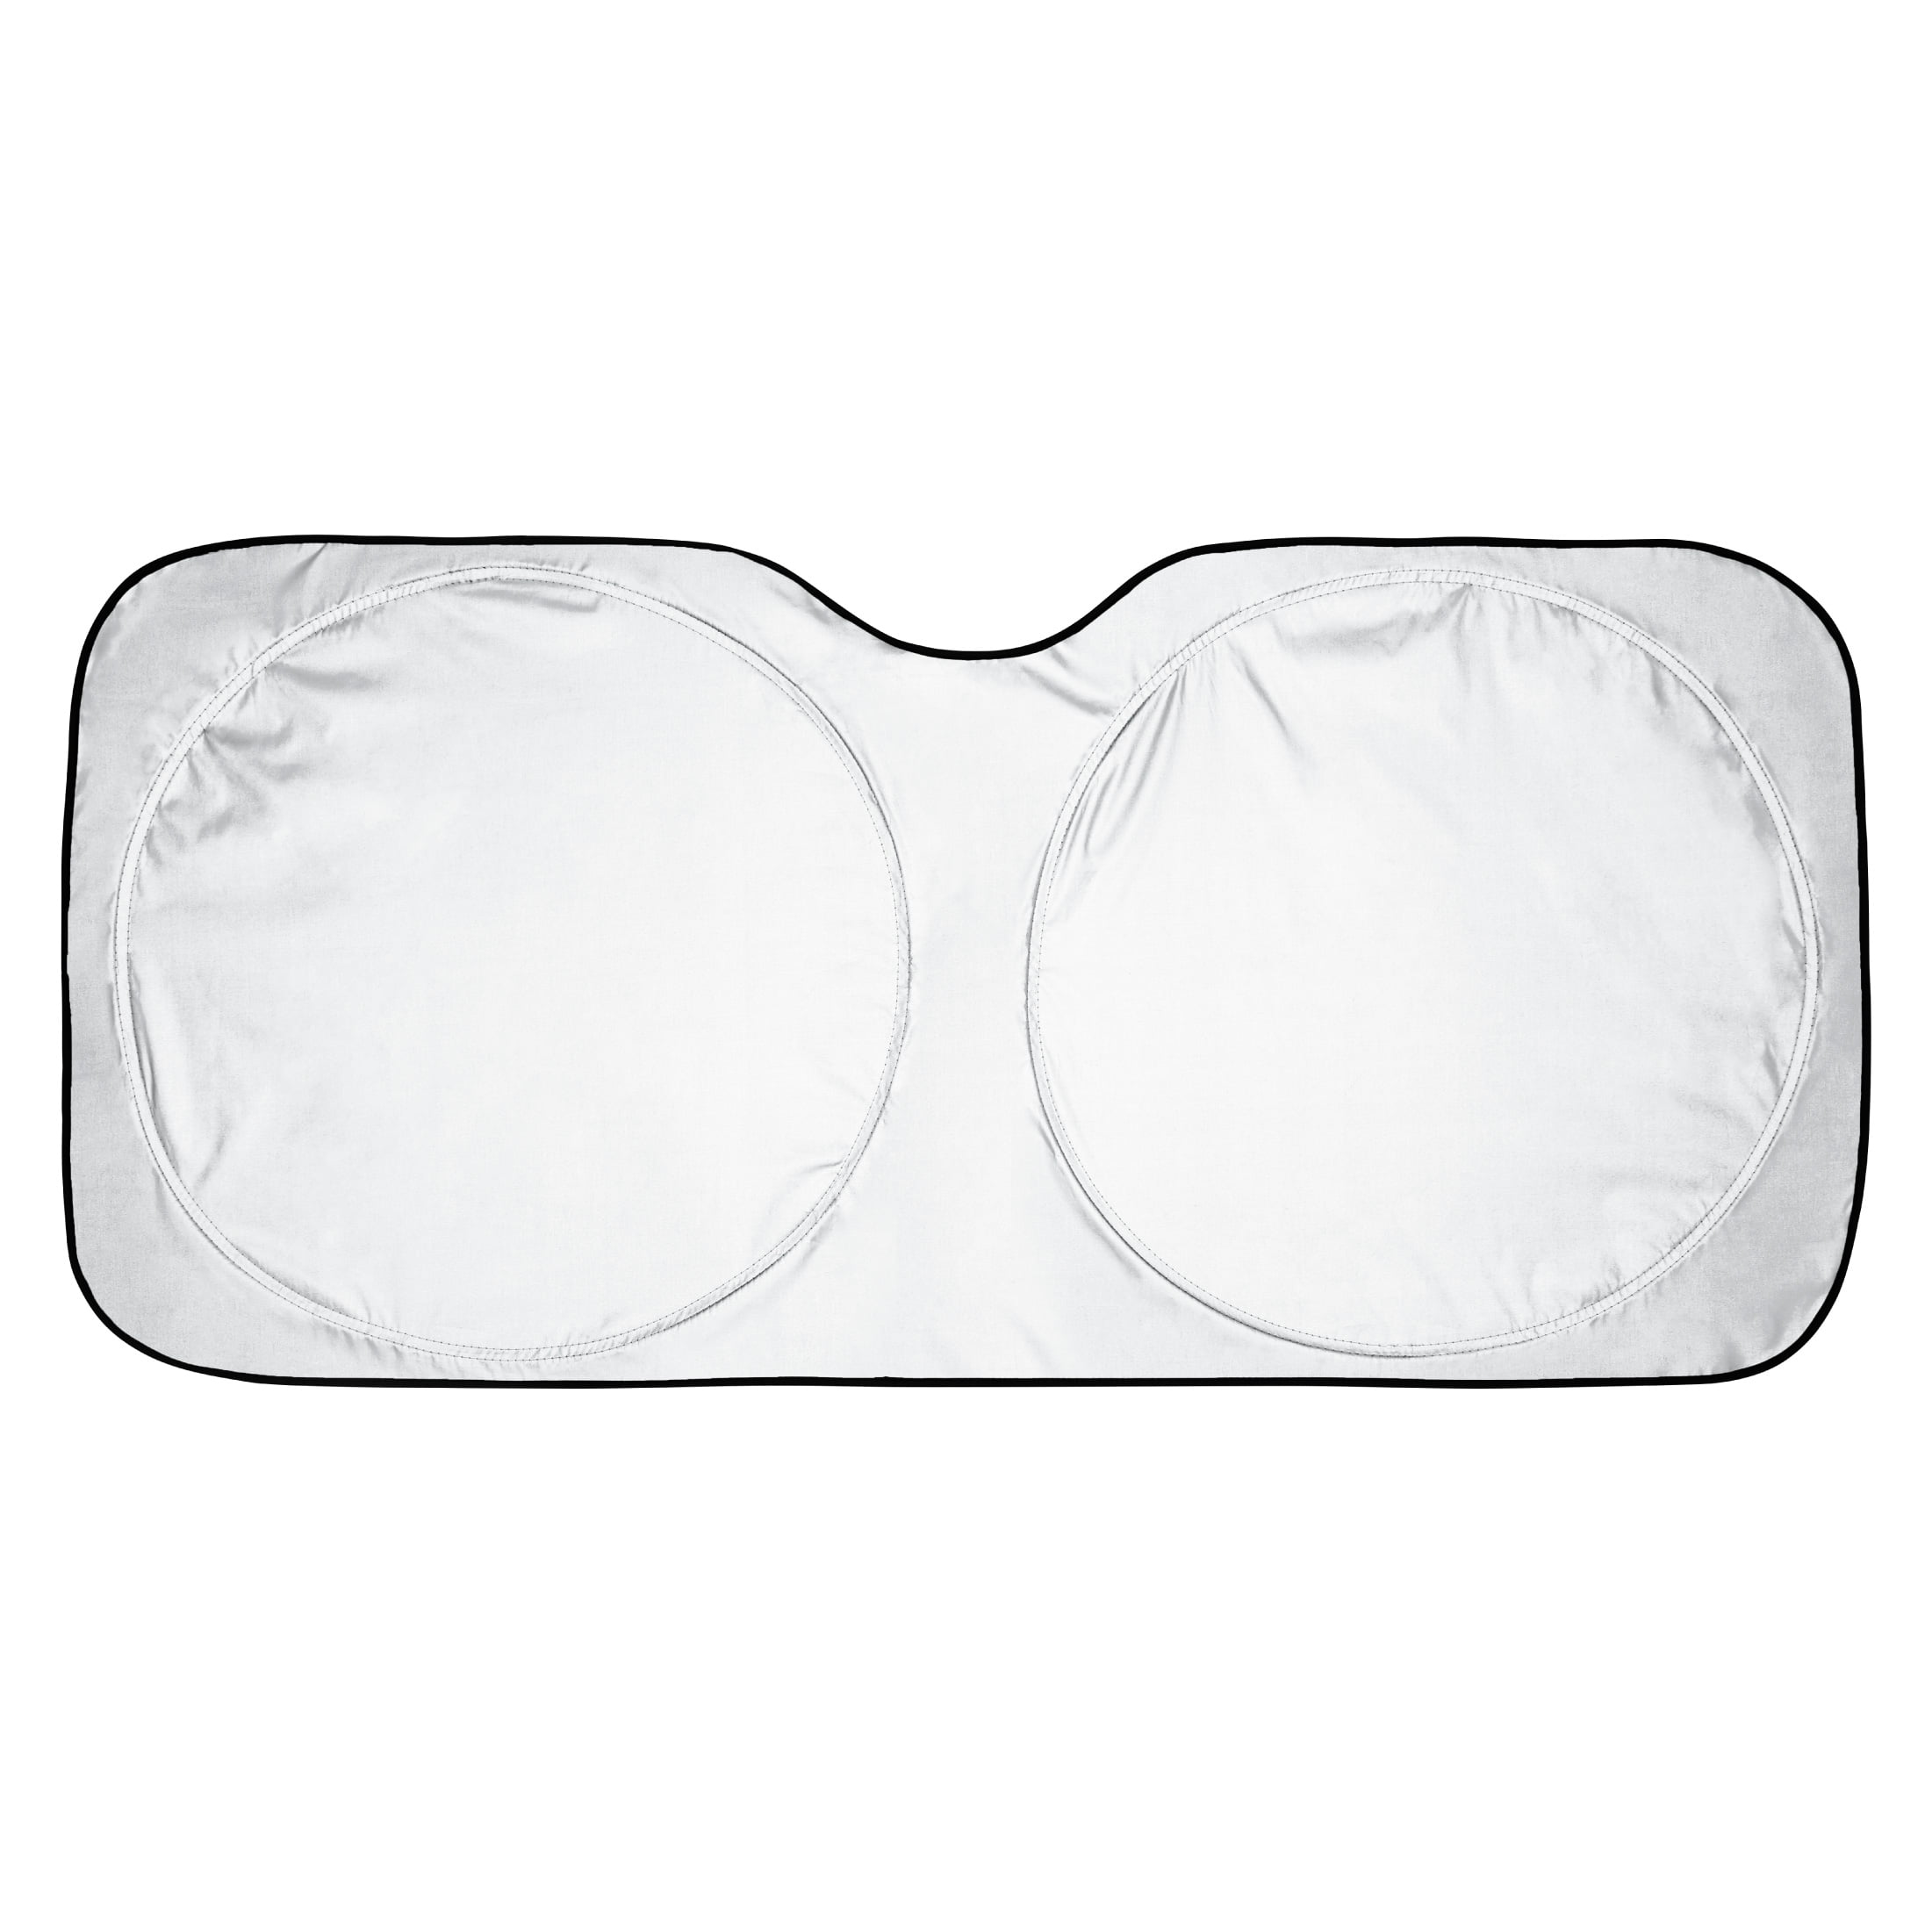 Auto Drive Double Rings Windshield AD22D-83 Twist Sun Shade 1 Pack,  63x29.5 